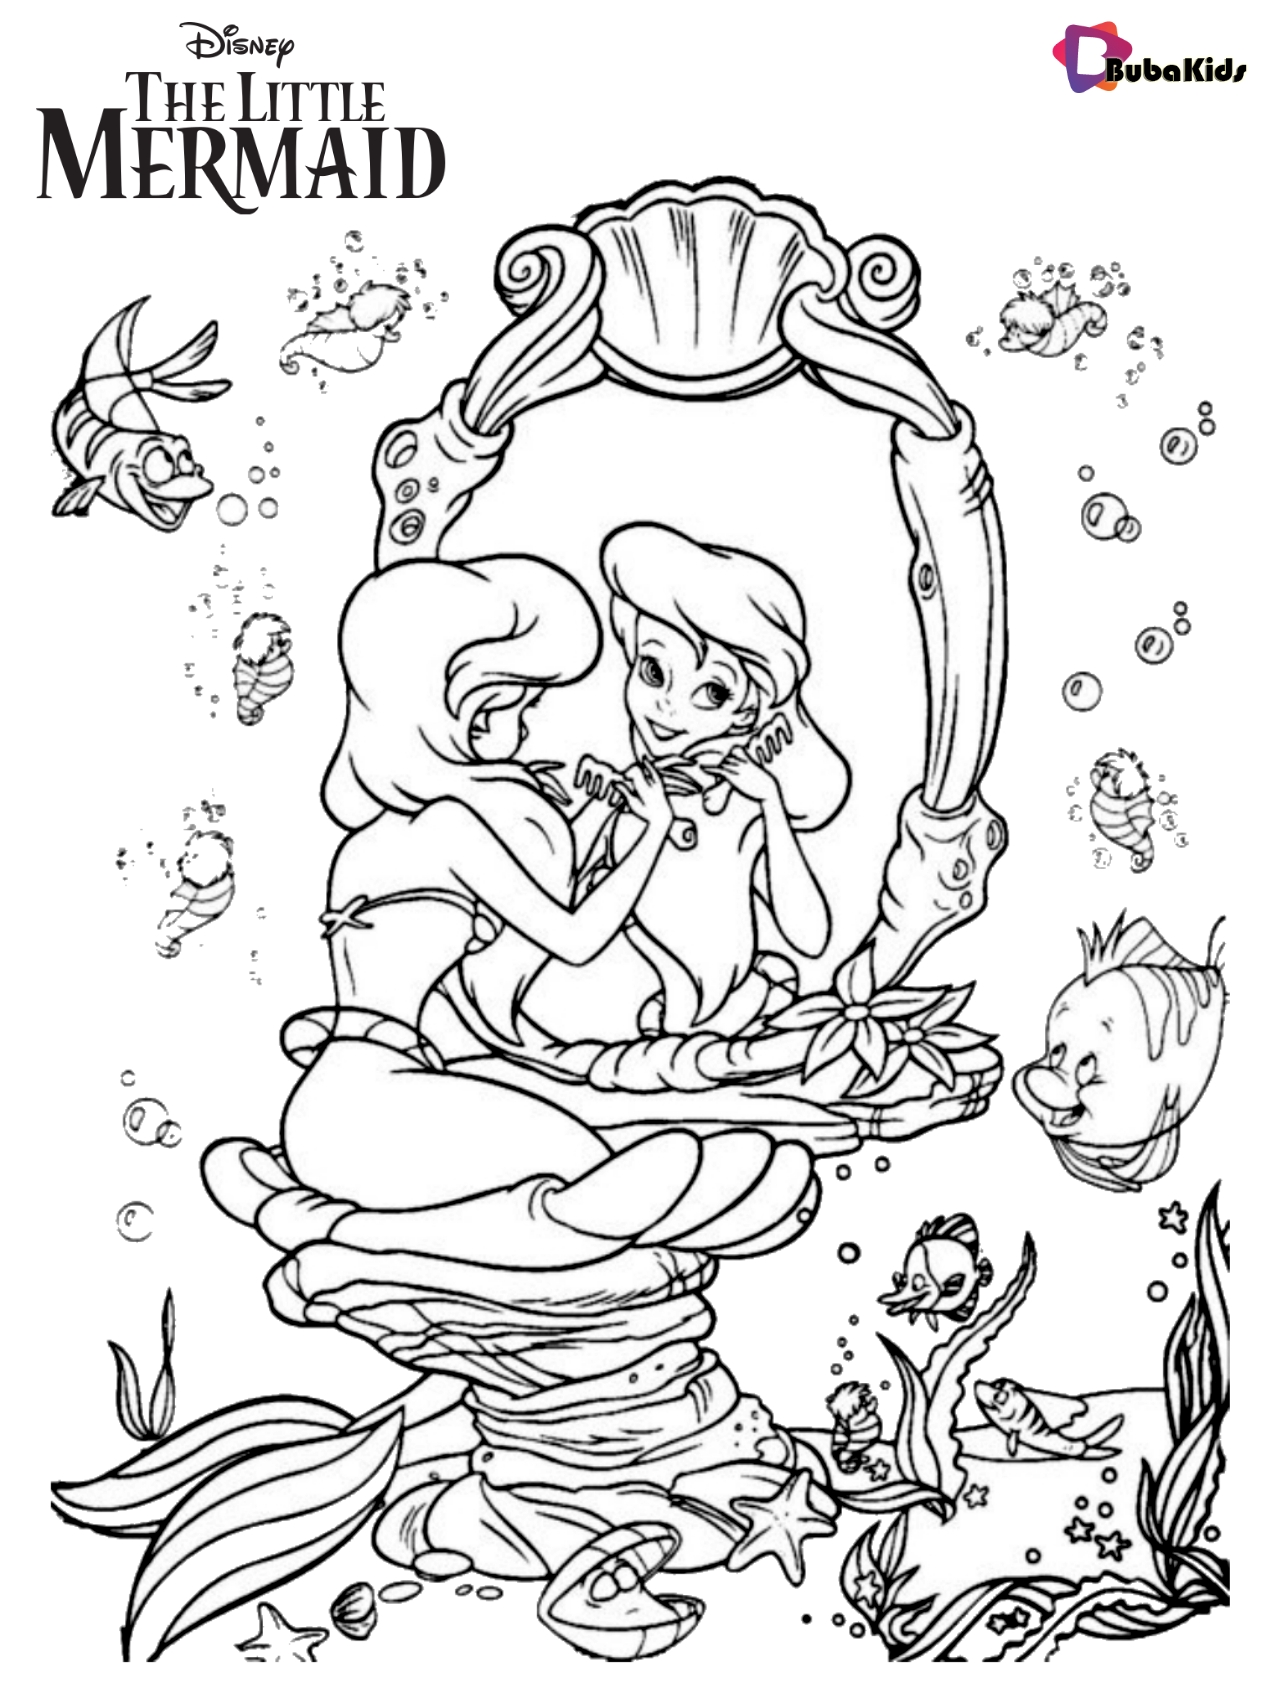 Free download and easy coloring sheet of disney the little mermaid coloring page Wallpaper